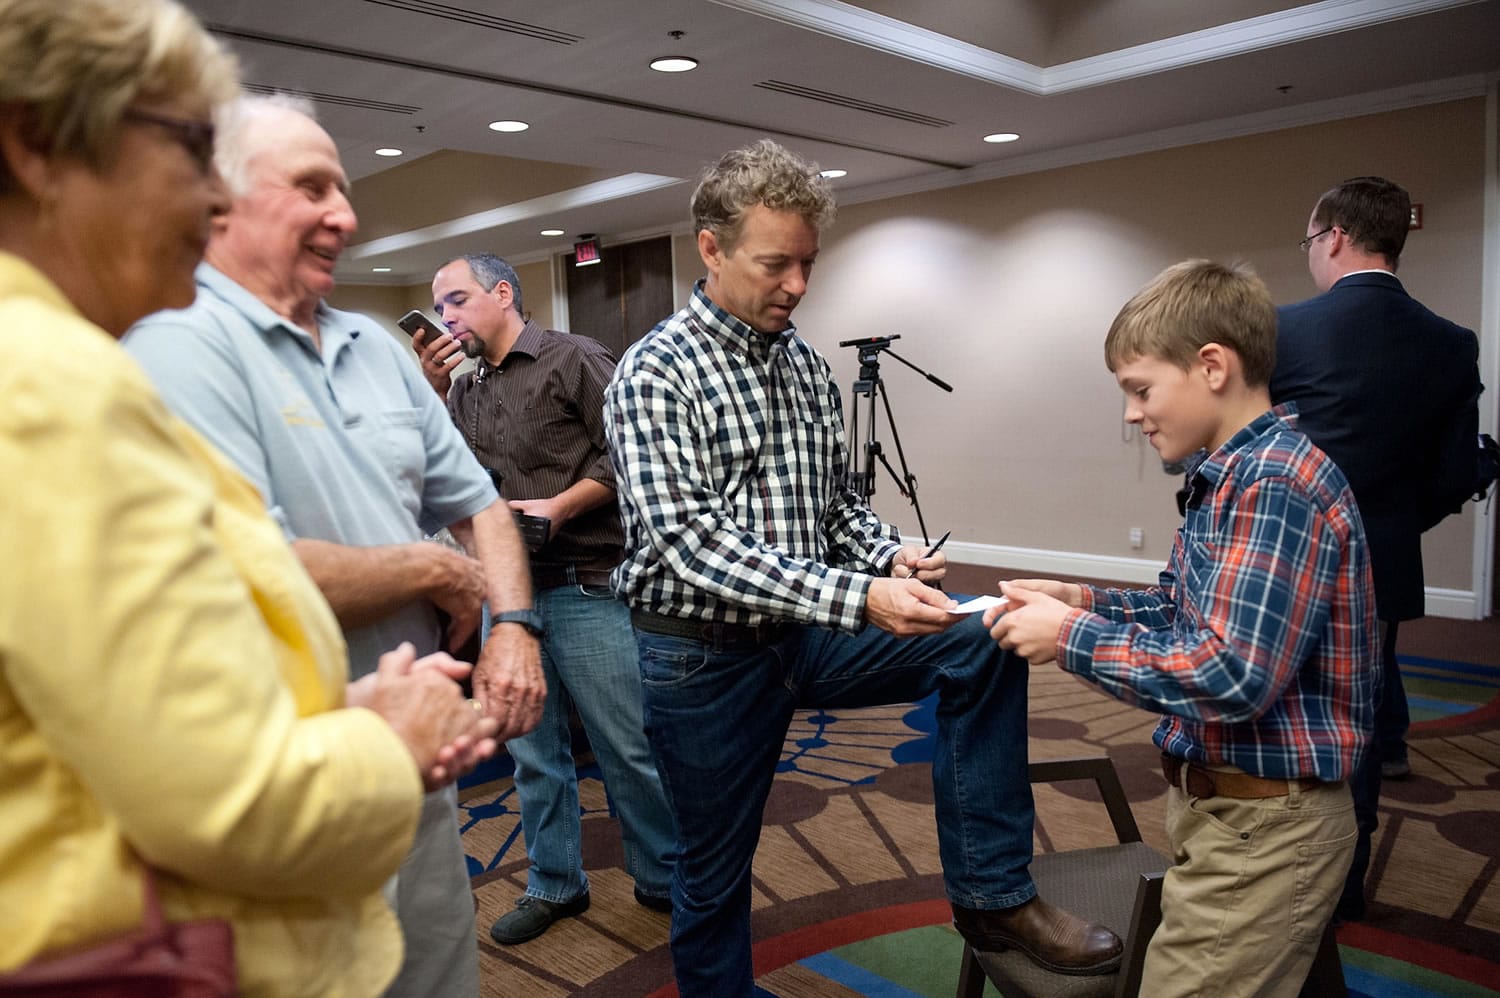 Republican presidential candidate Rand Paul, center, hands an autographed card to a young supporter at a campaign rally in Anchorage, Alaska, on Tuesday. At left are supporters Sally and Chuck Heath of Wasilla, Alaska.